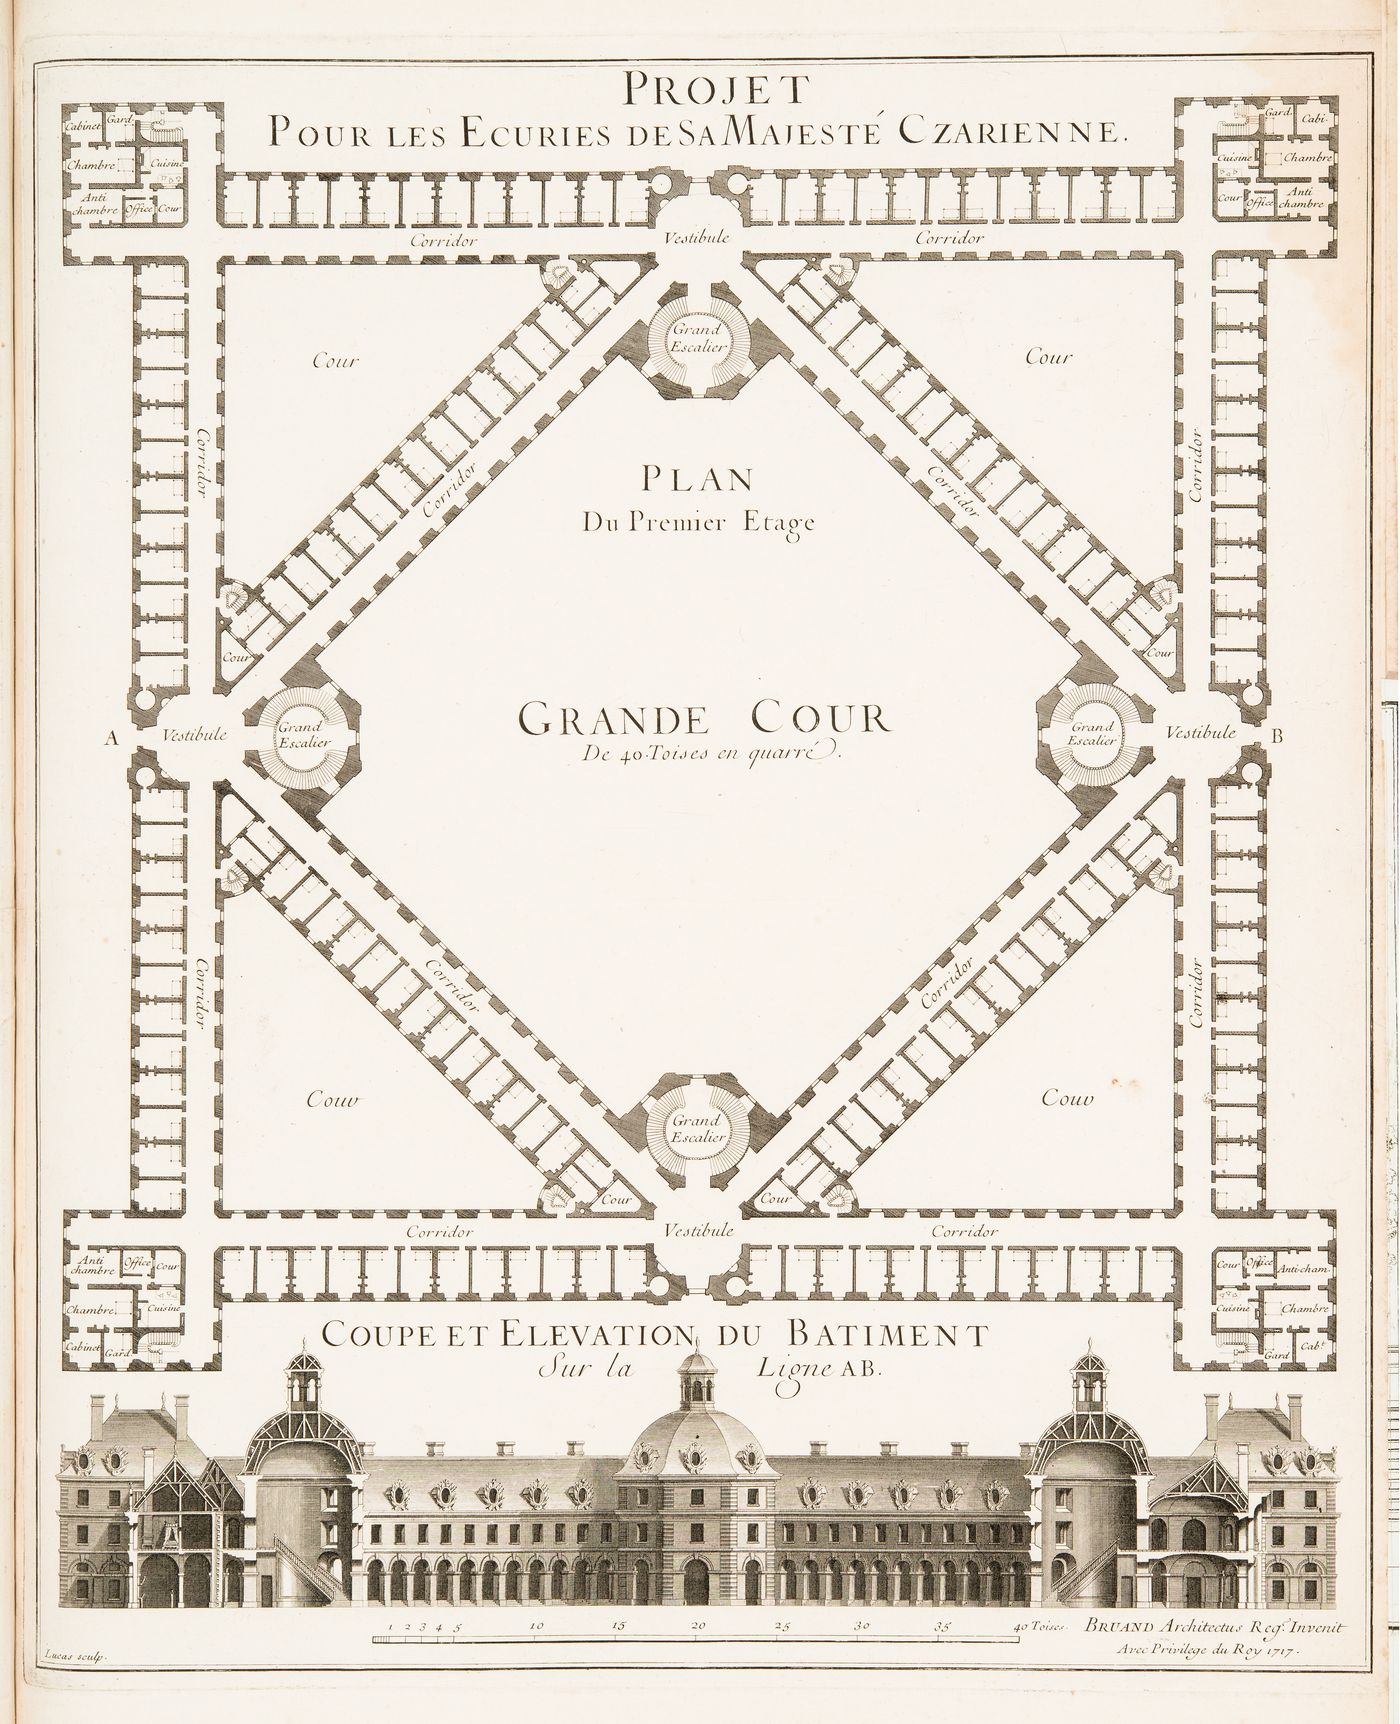 Design by François Bruant for a stable for the Czarina: First floor plan and sectional elevation through the large courtyard